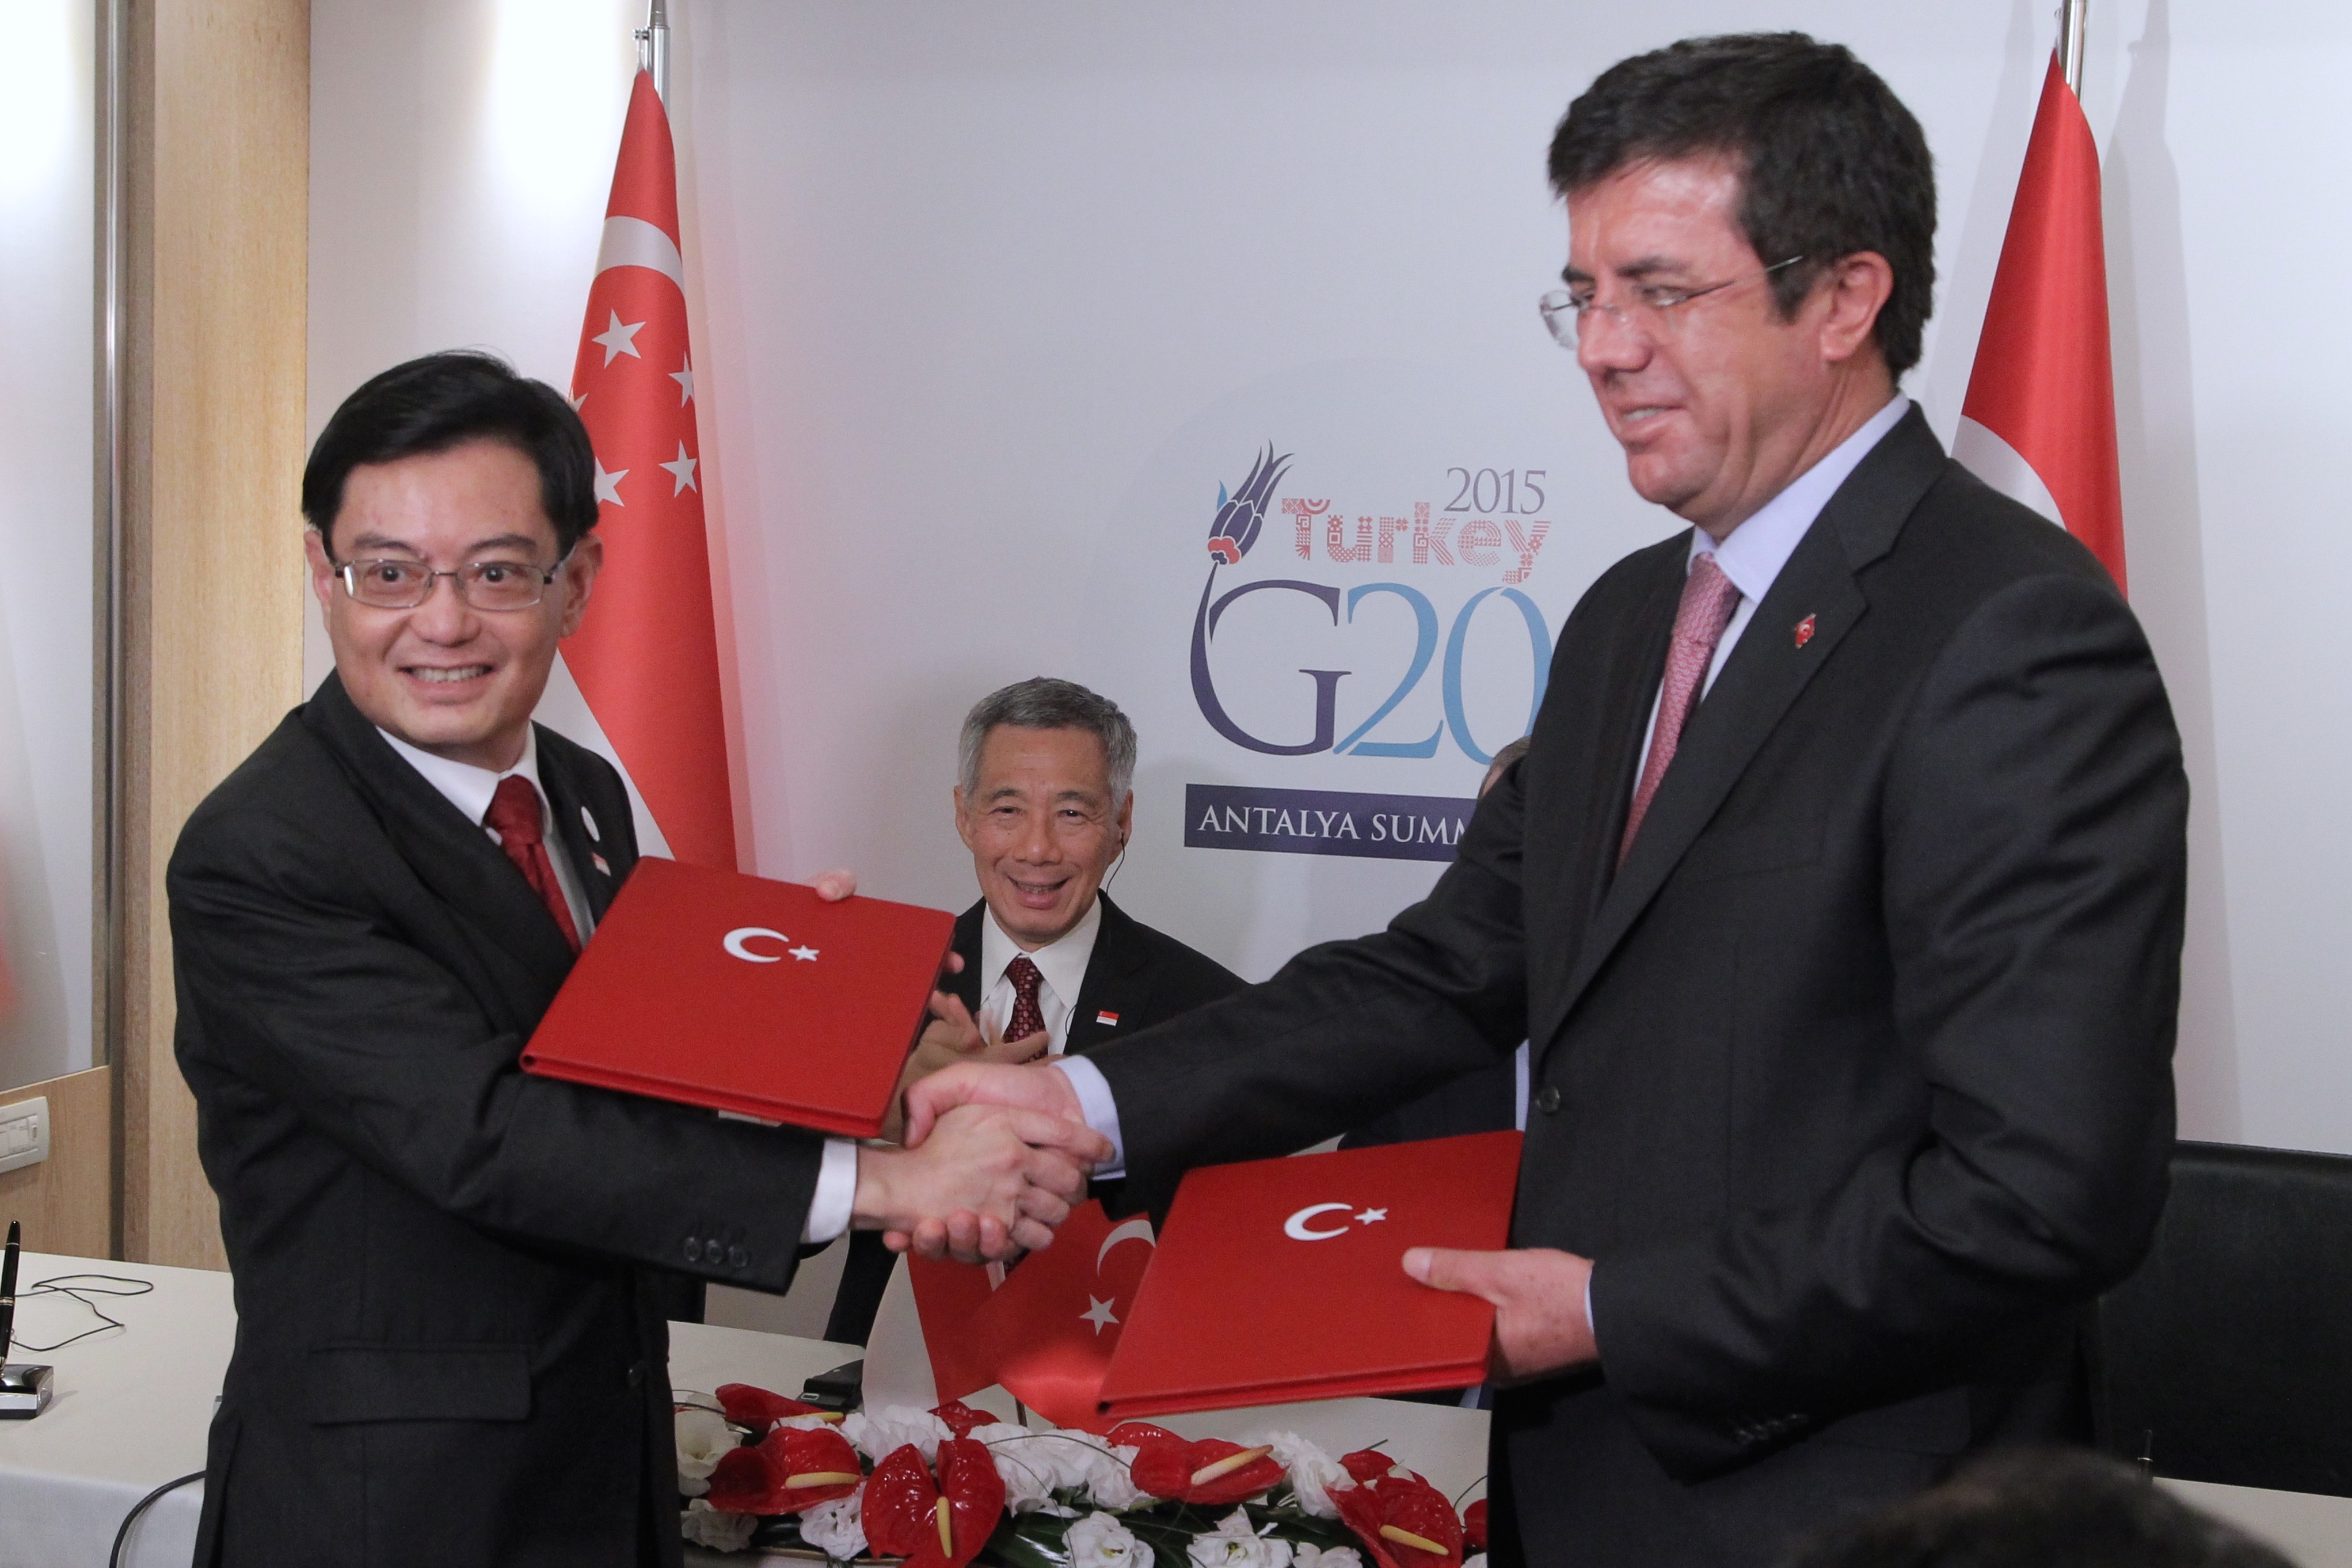 Prime Minister Lee Hsien Loong at the G20 Summit in November 2015 in Antalya Turkey (MCI Photo by Kenji Soon)